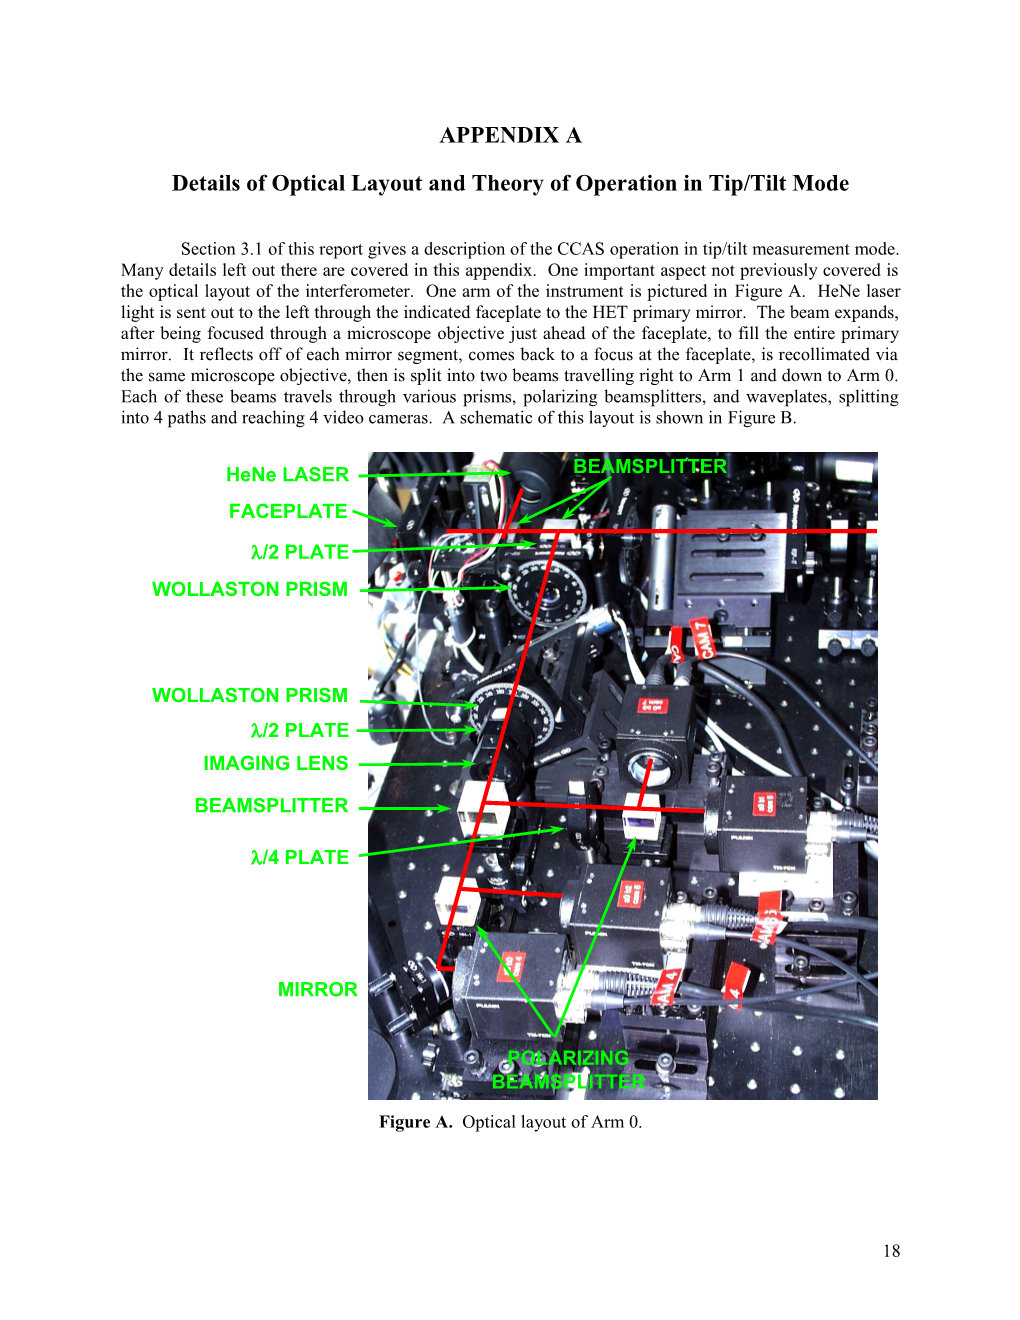 Details of Optical Layout and Theory of Operation in Tip/Tilt Mode